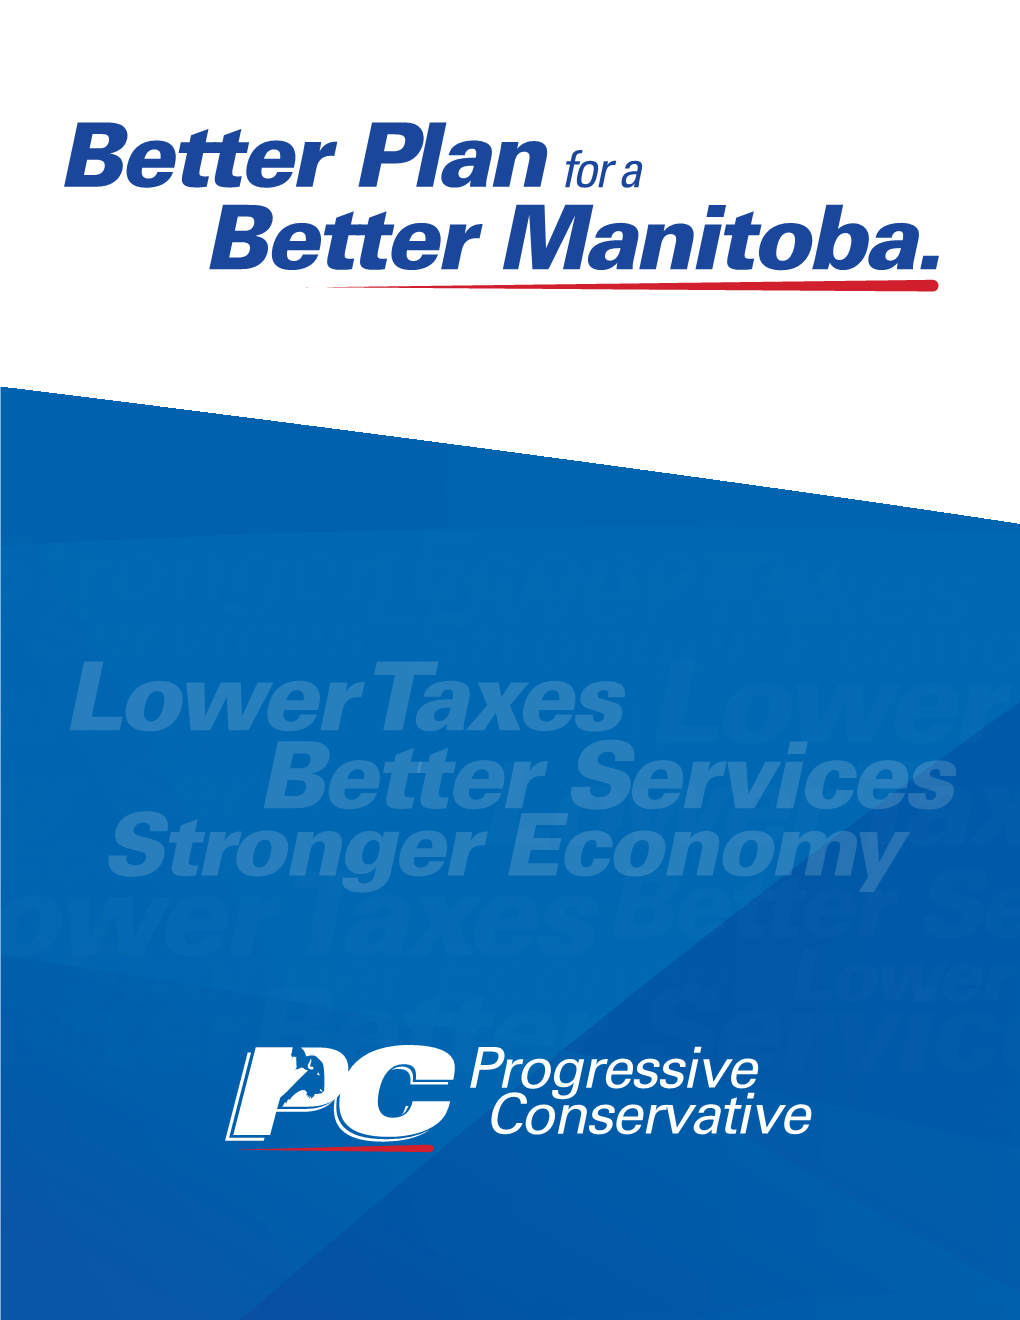 Lower Taxes Better Servicesbetter Services Stronger Economystronger Lowereconomy Taxes Better Services Lowerstronger Taxes Economylower Taxes